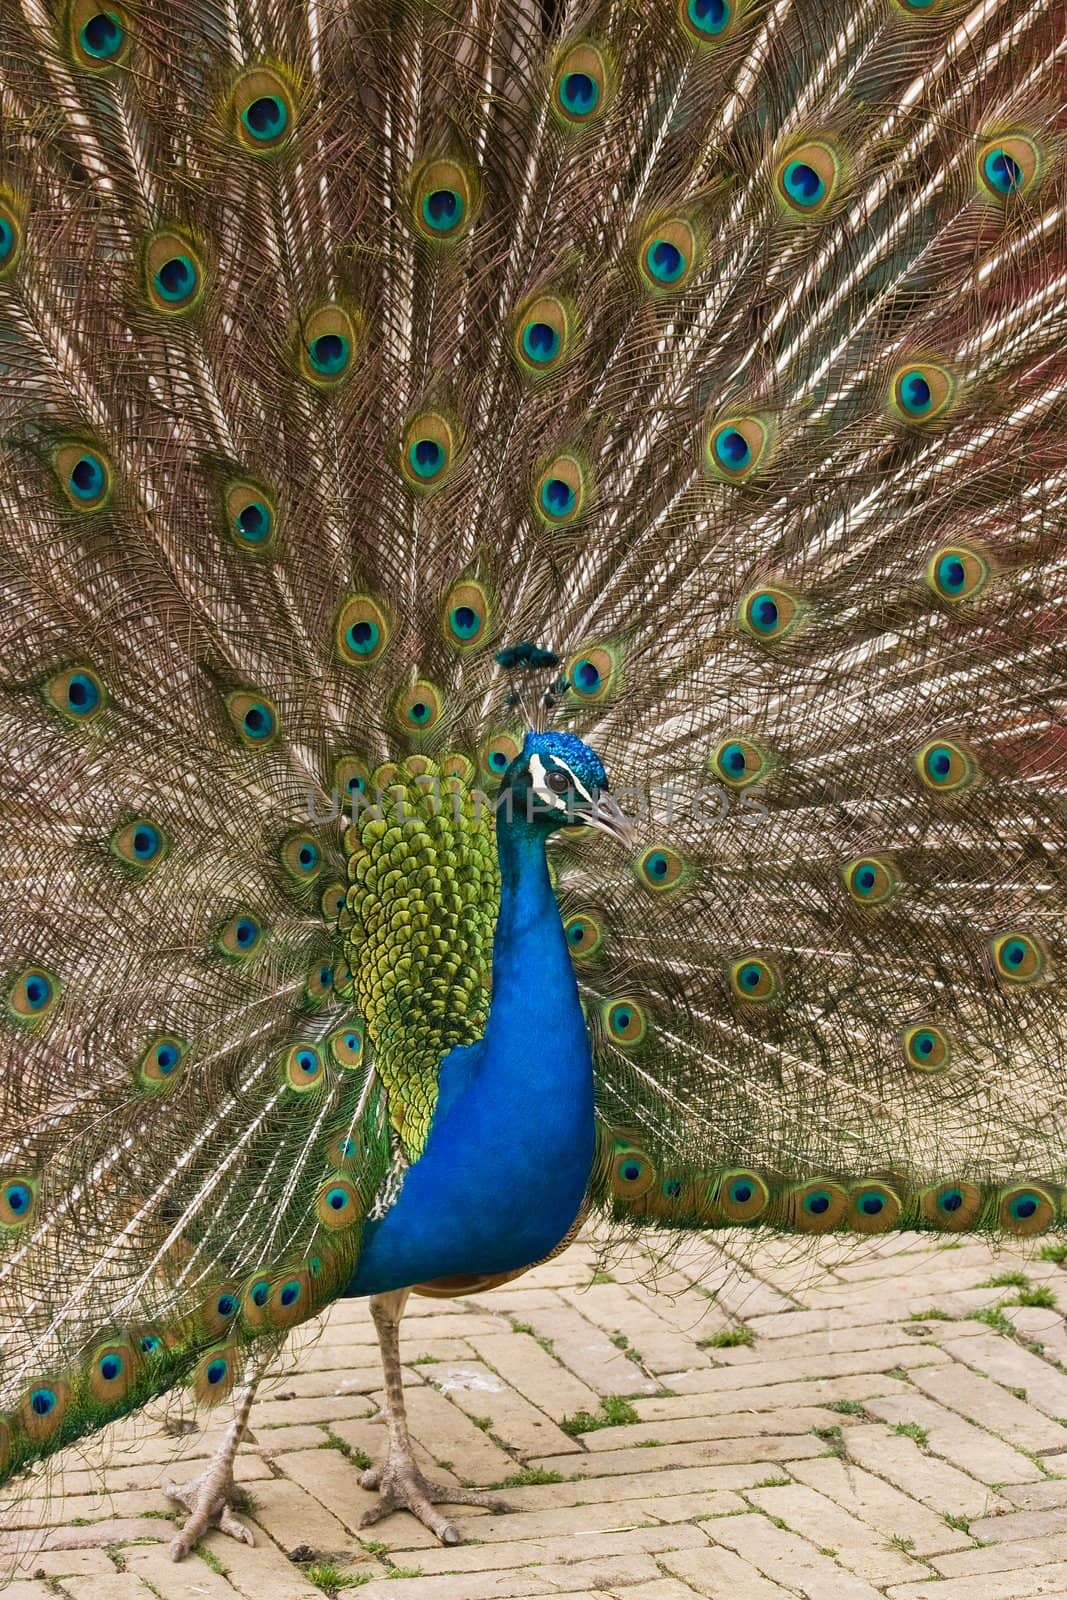 Peacock showing feathers by Colette